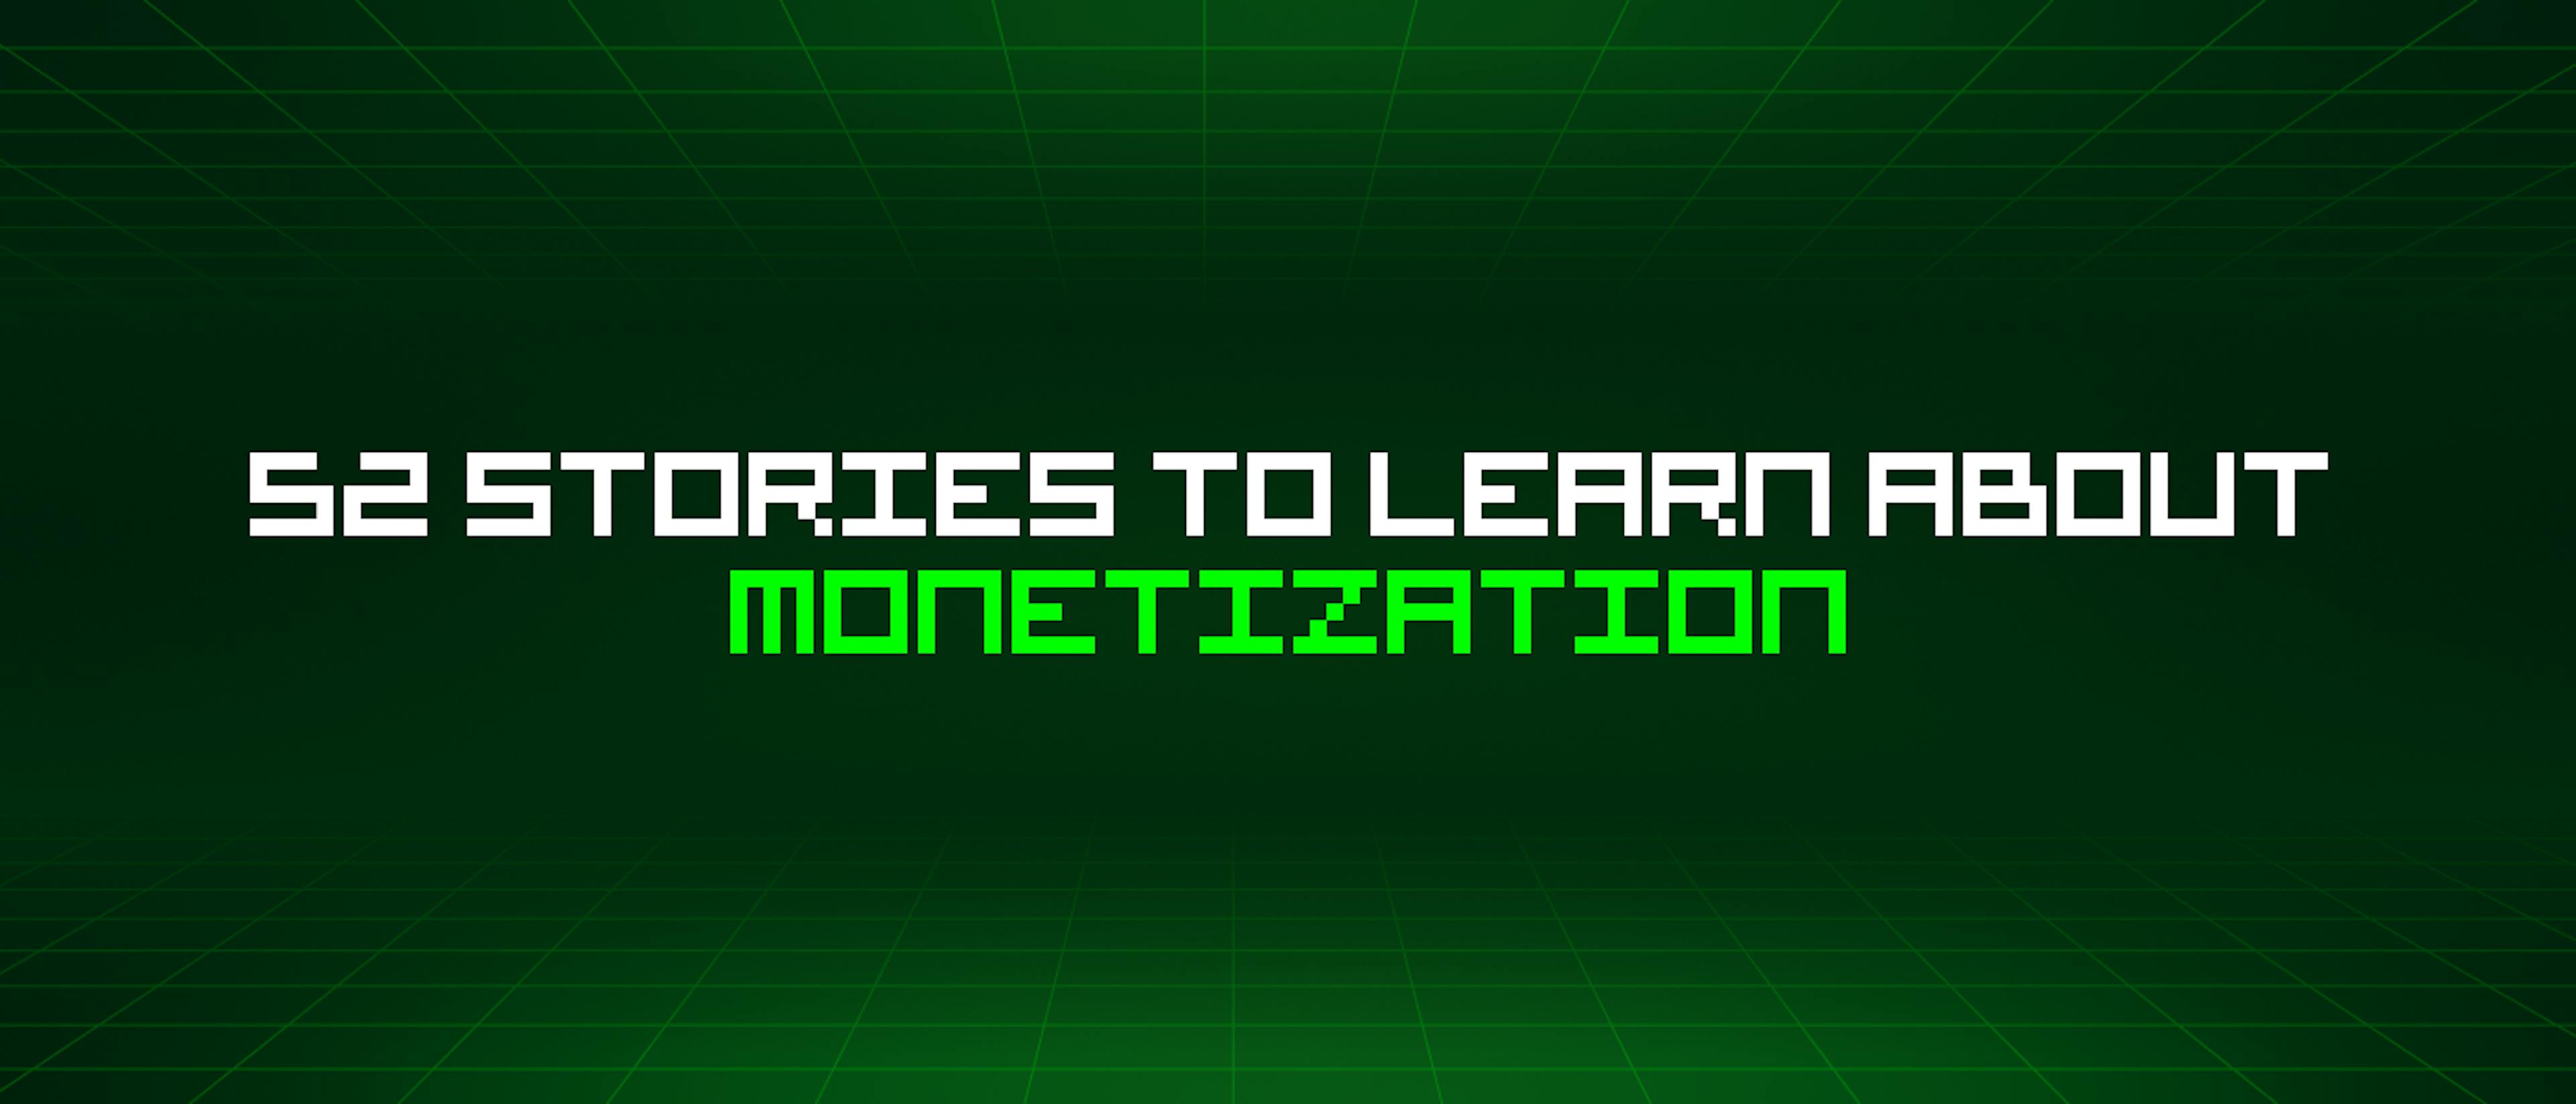 featured image - 52 Stories To Learn About Monetization